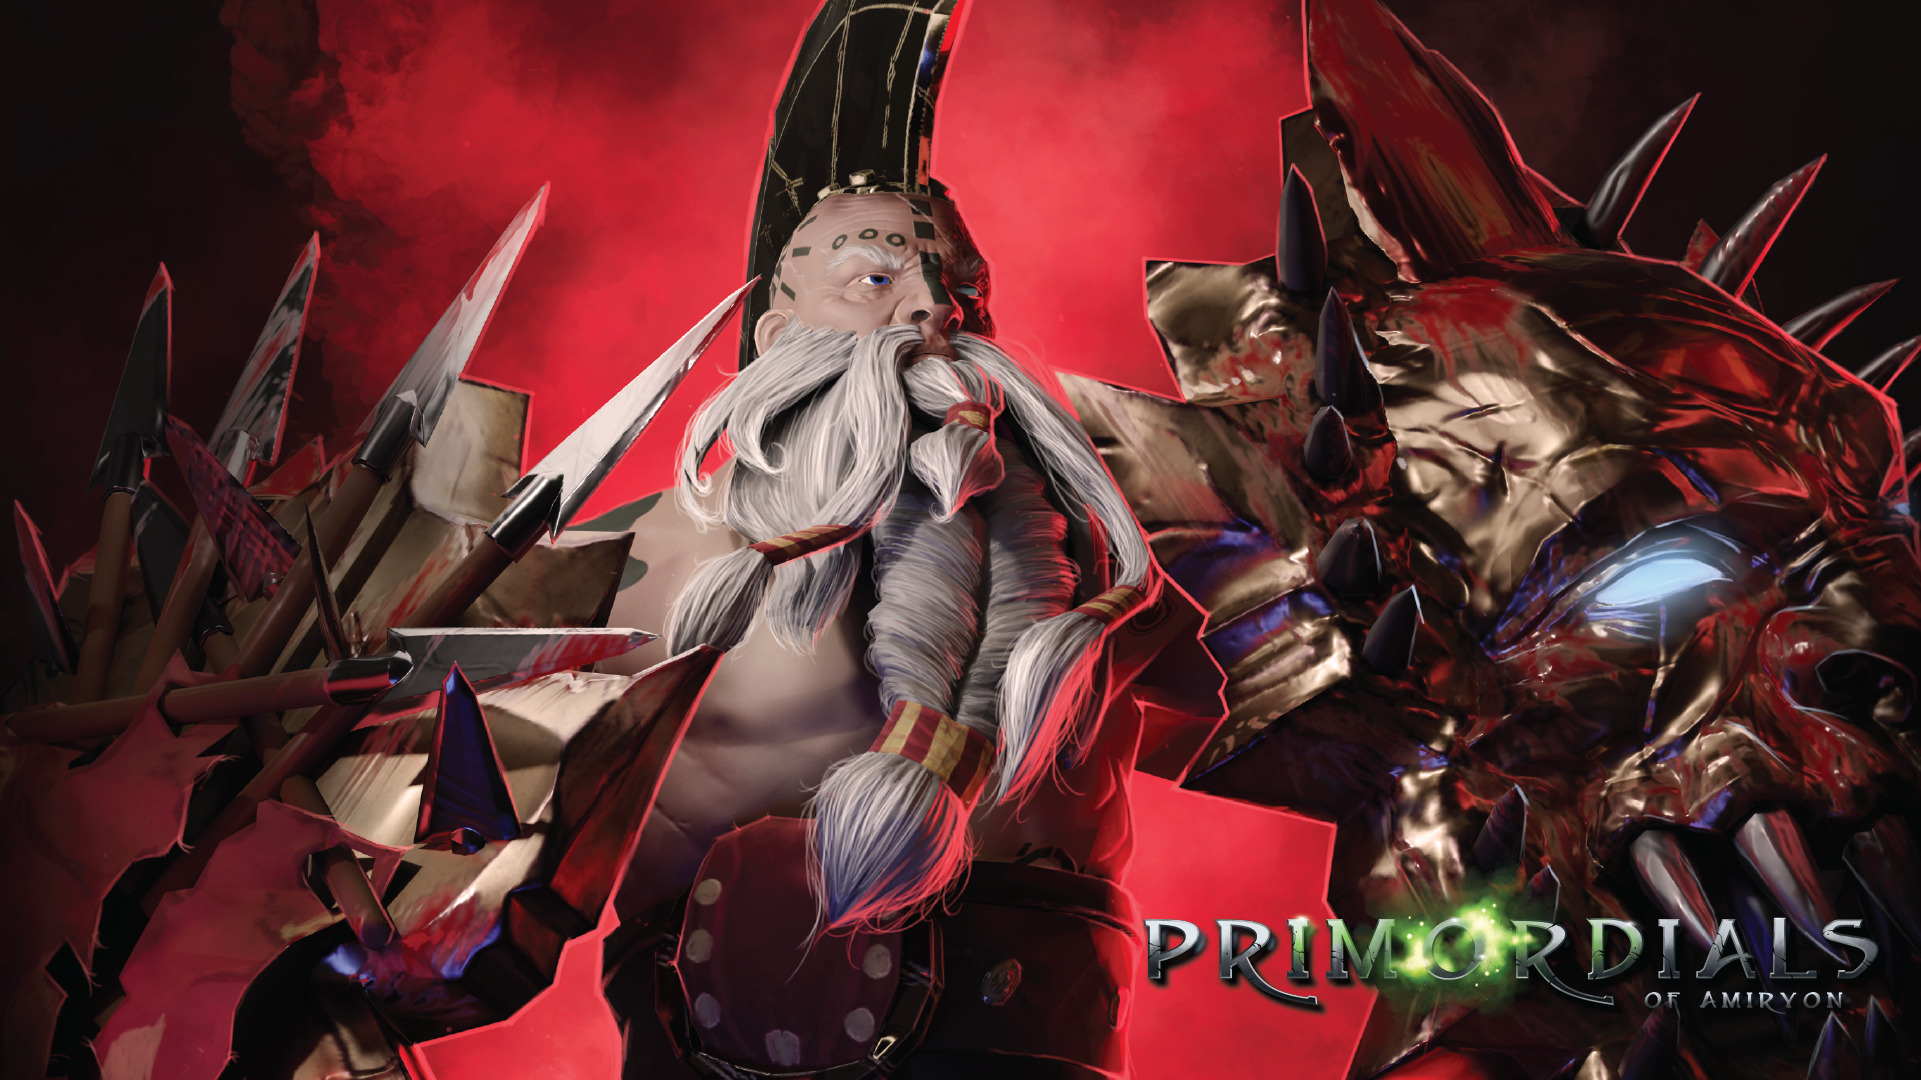 Primordials: Battle of Gods Is Going Free To Play On PC In March